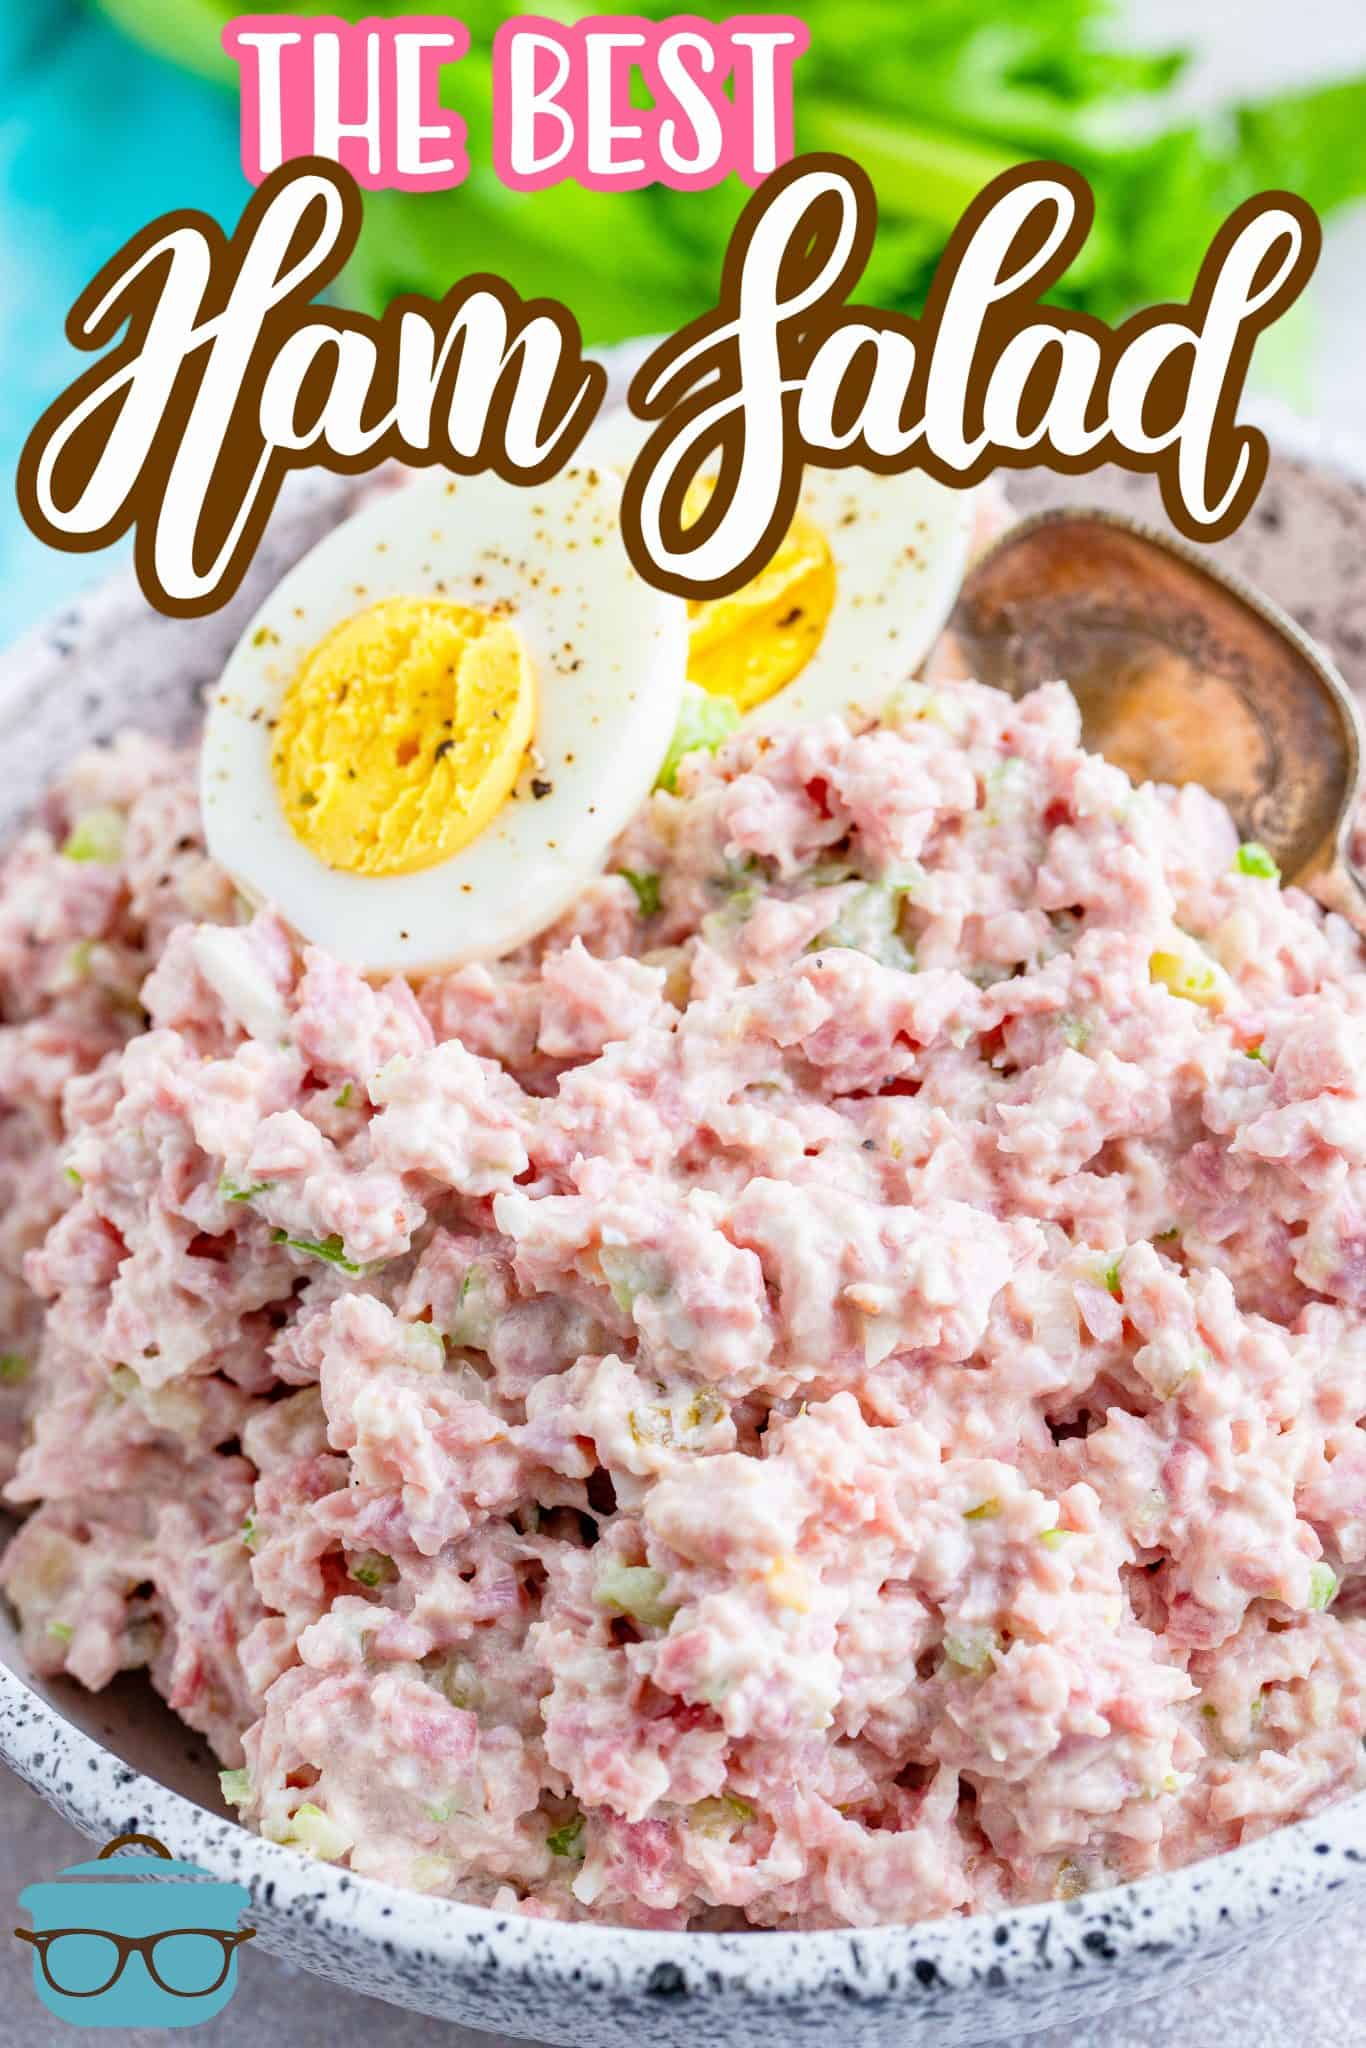 Ham salad perfect for a funeral lunch, recipe from the Country Cook